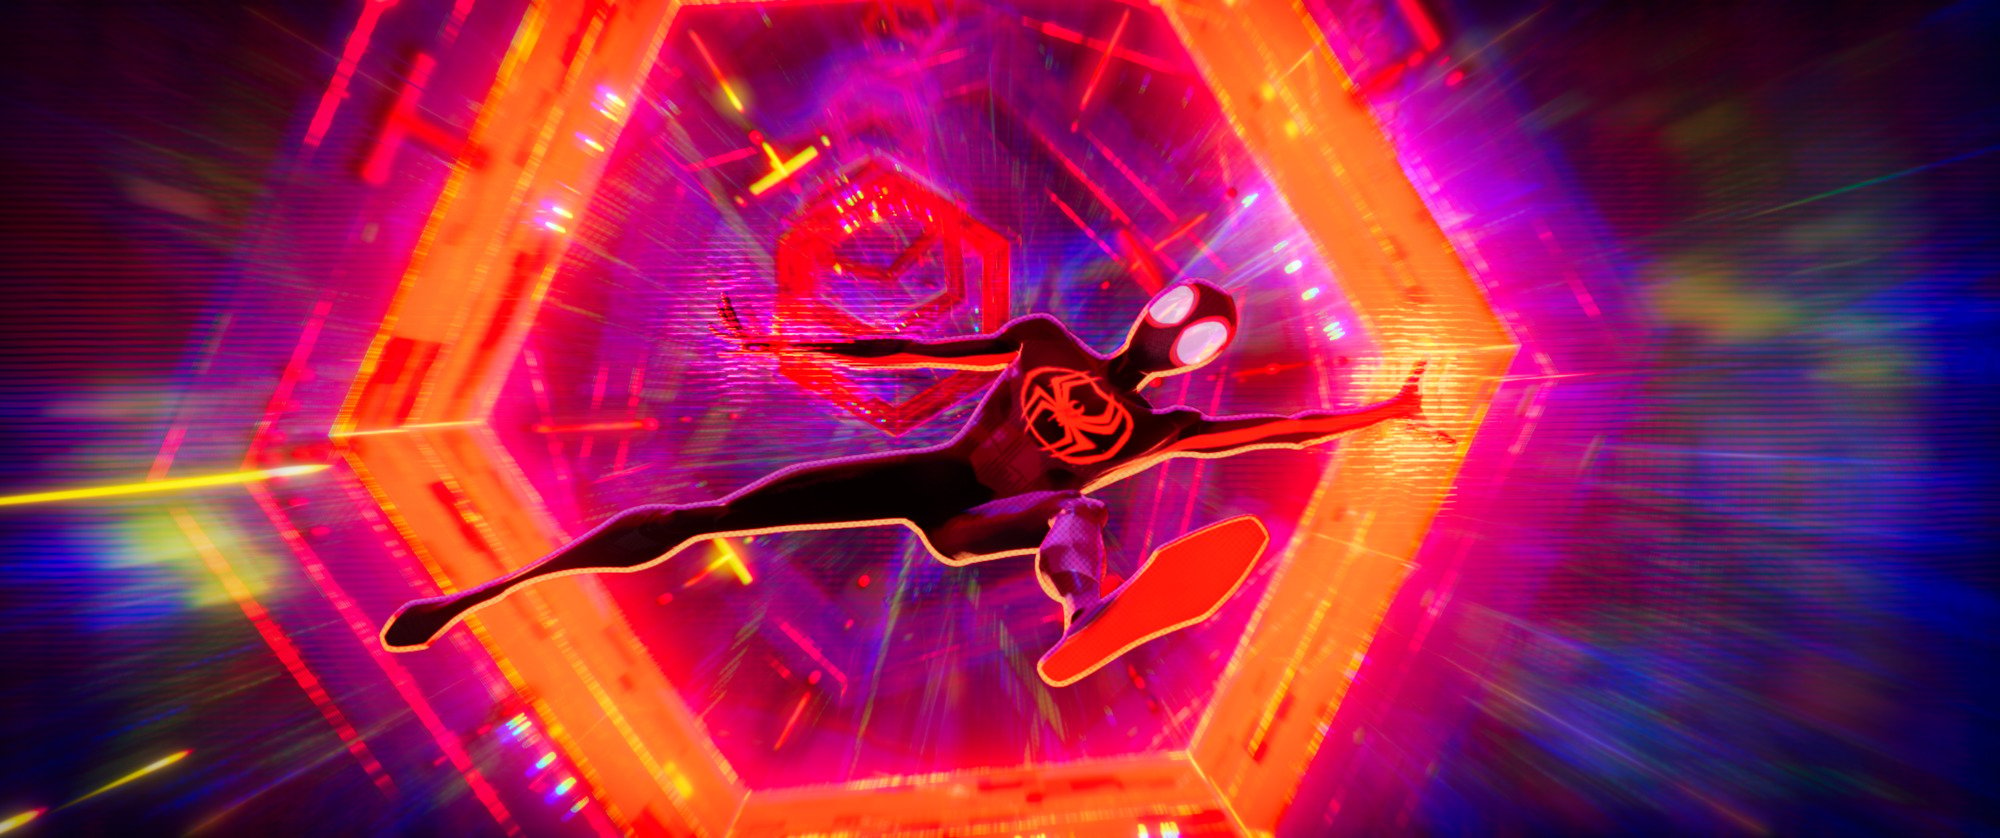 Film still From the Spiderverse movies